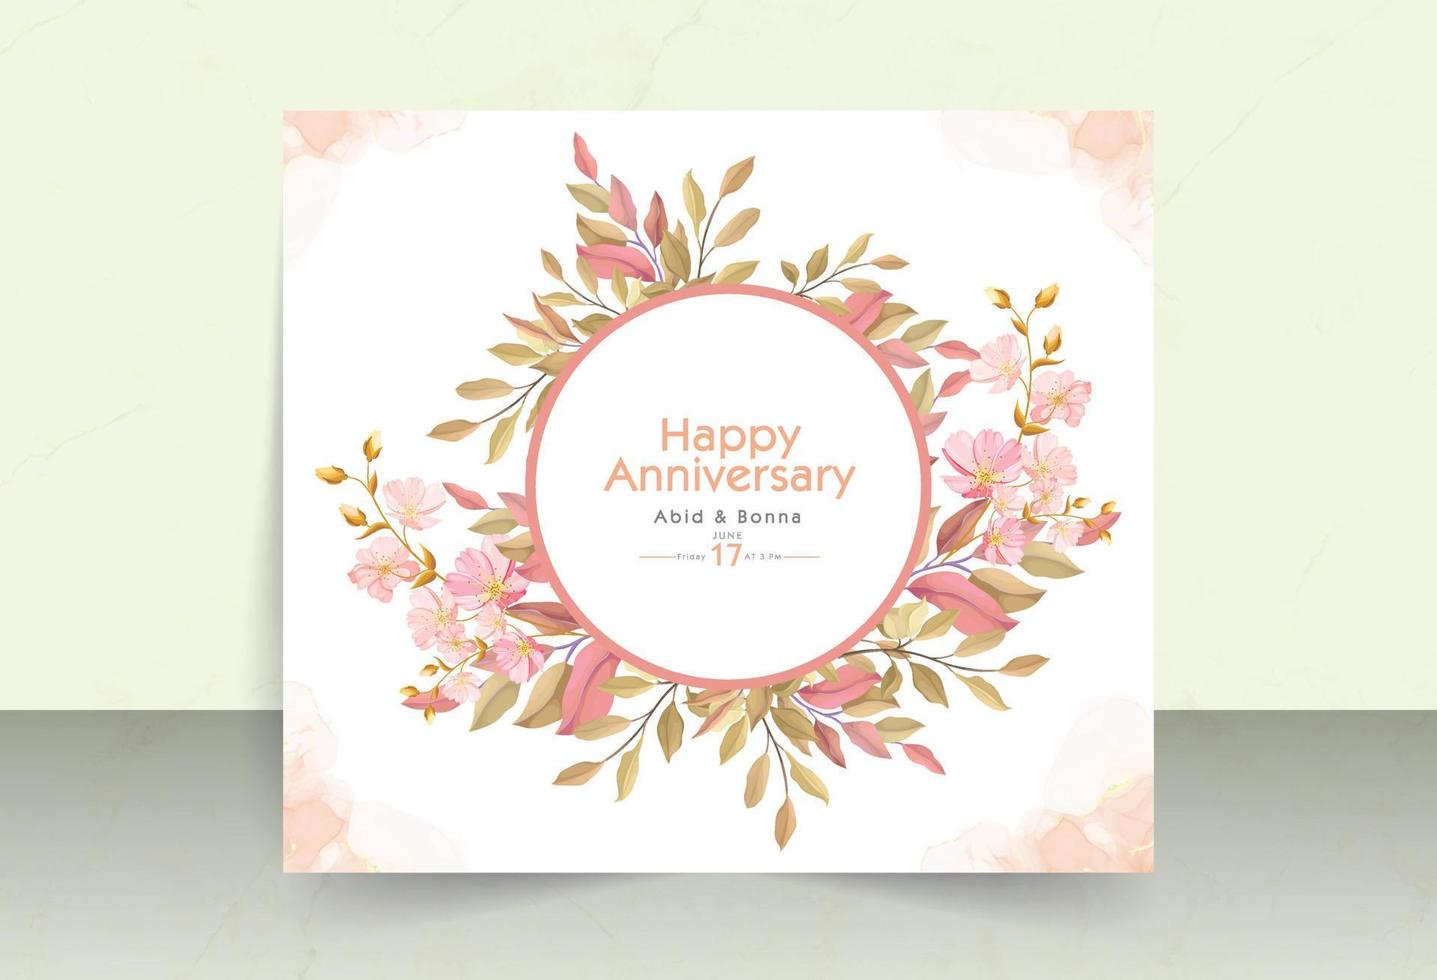 Pink orange leaves with cosmos flower and round frame anniversary card vector